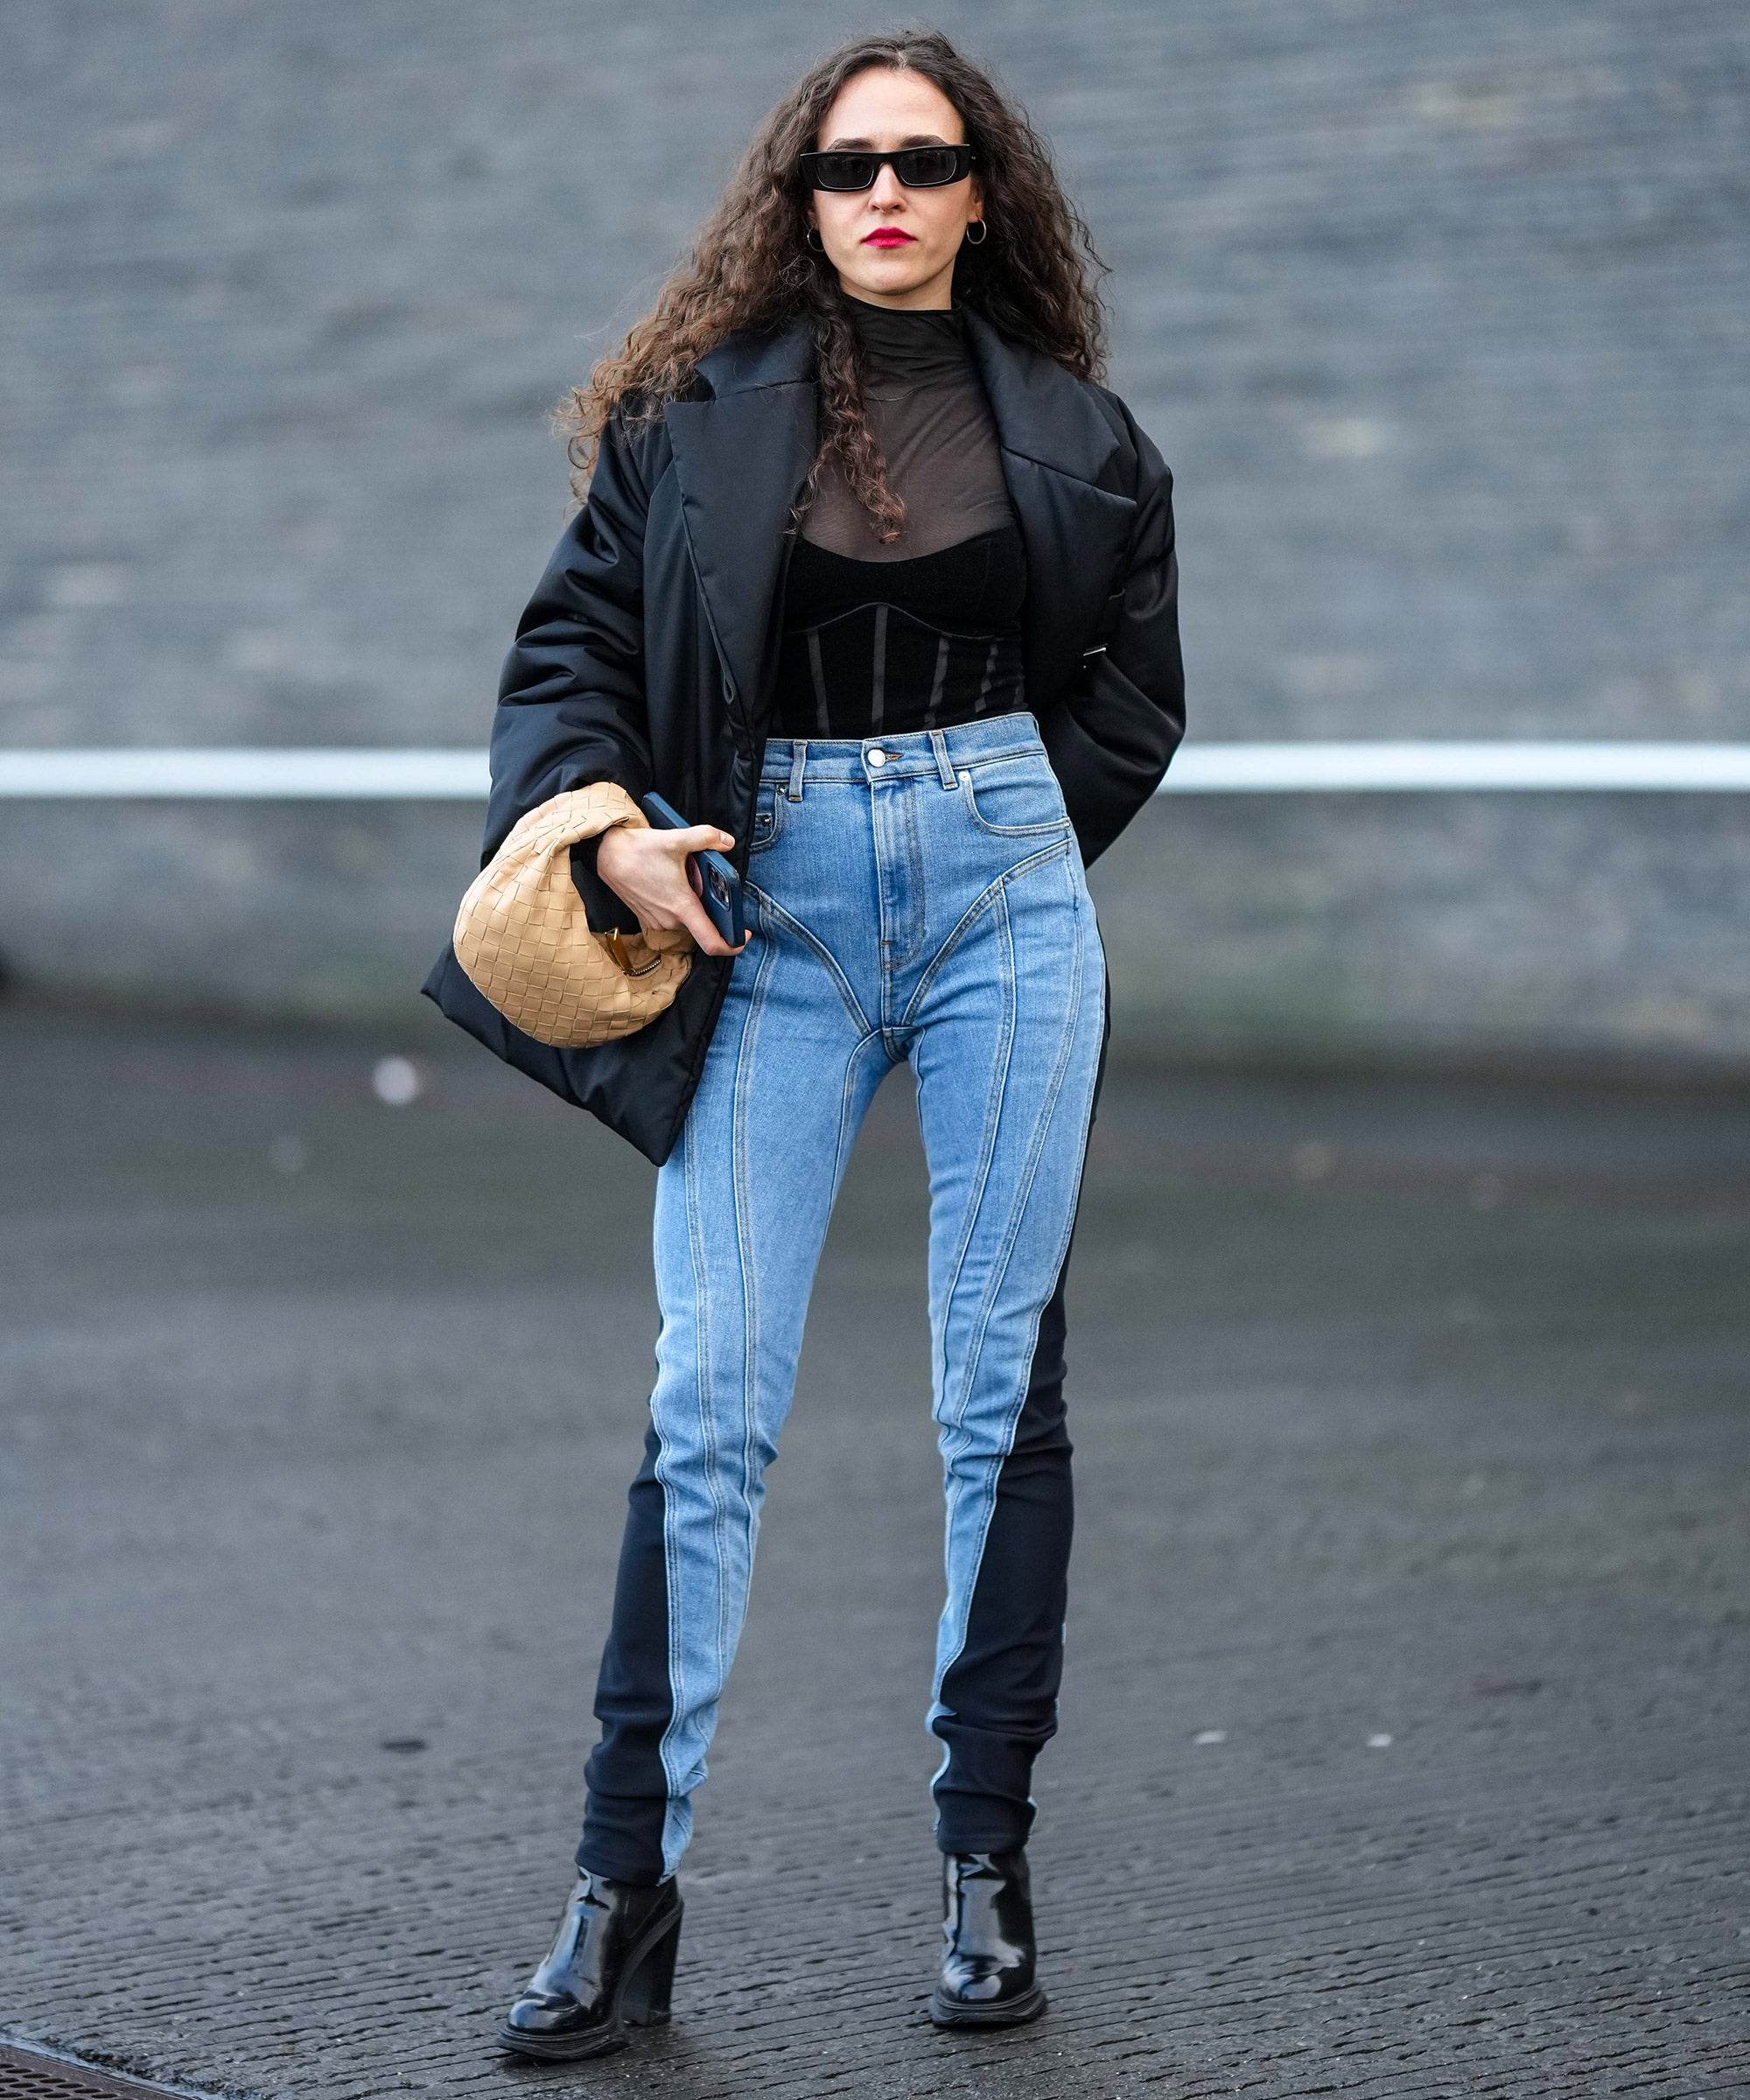 How to Wear High-Waisted Jeans - How Fashion Editors Style High